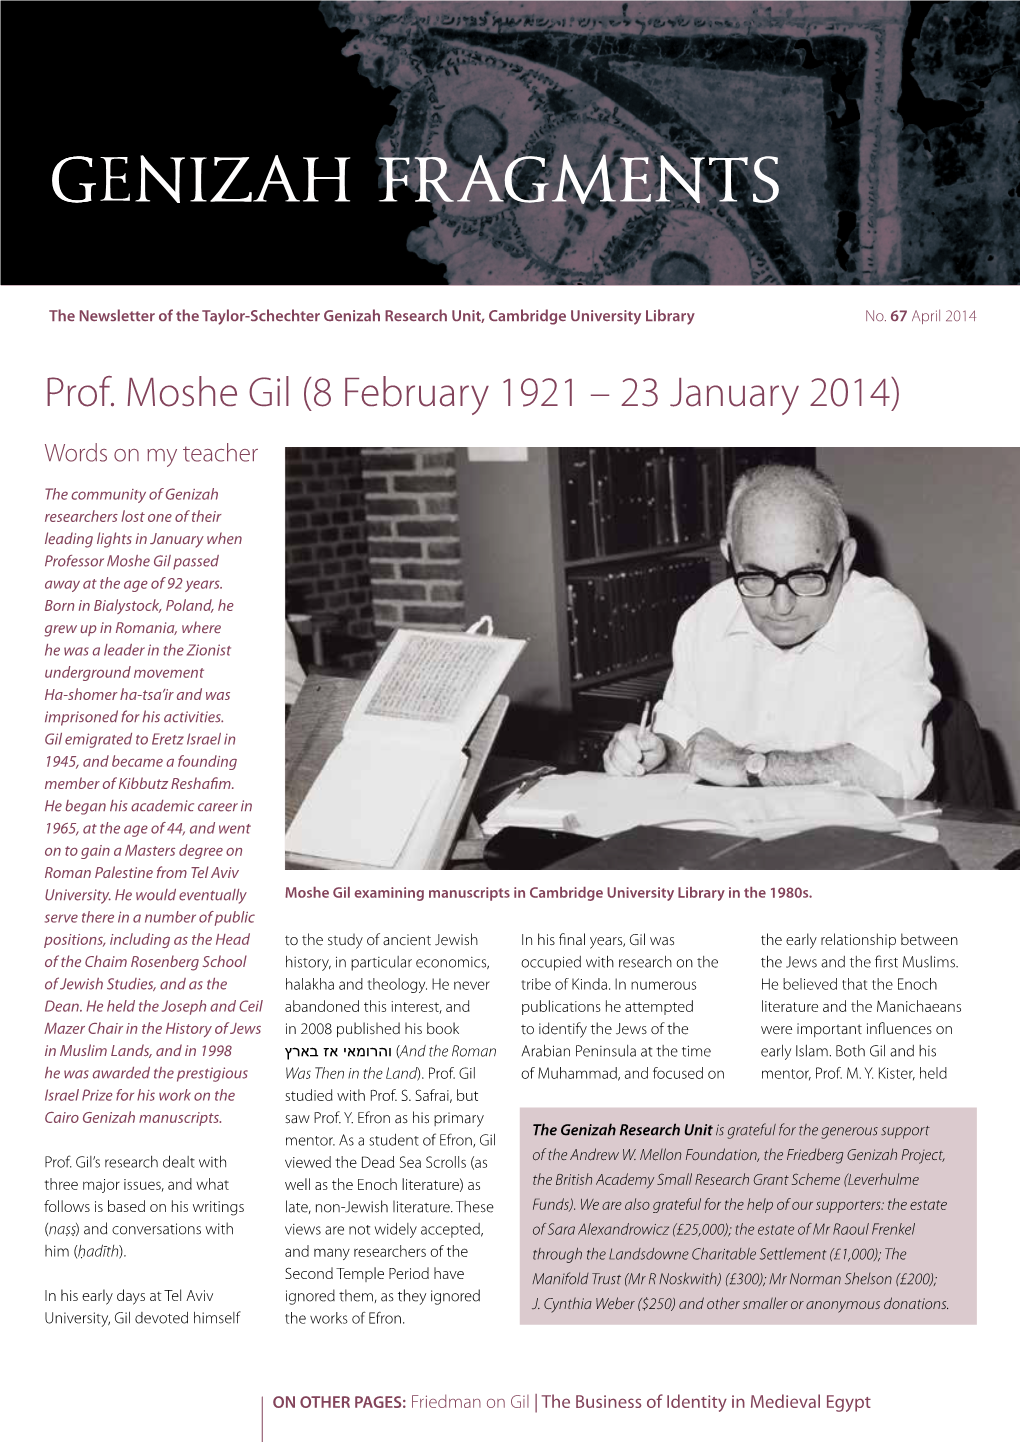 Prof. Moshe Gil (8 February 1921 – 23 January 2014) Contributions in the Many Areas Tirelessly